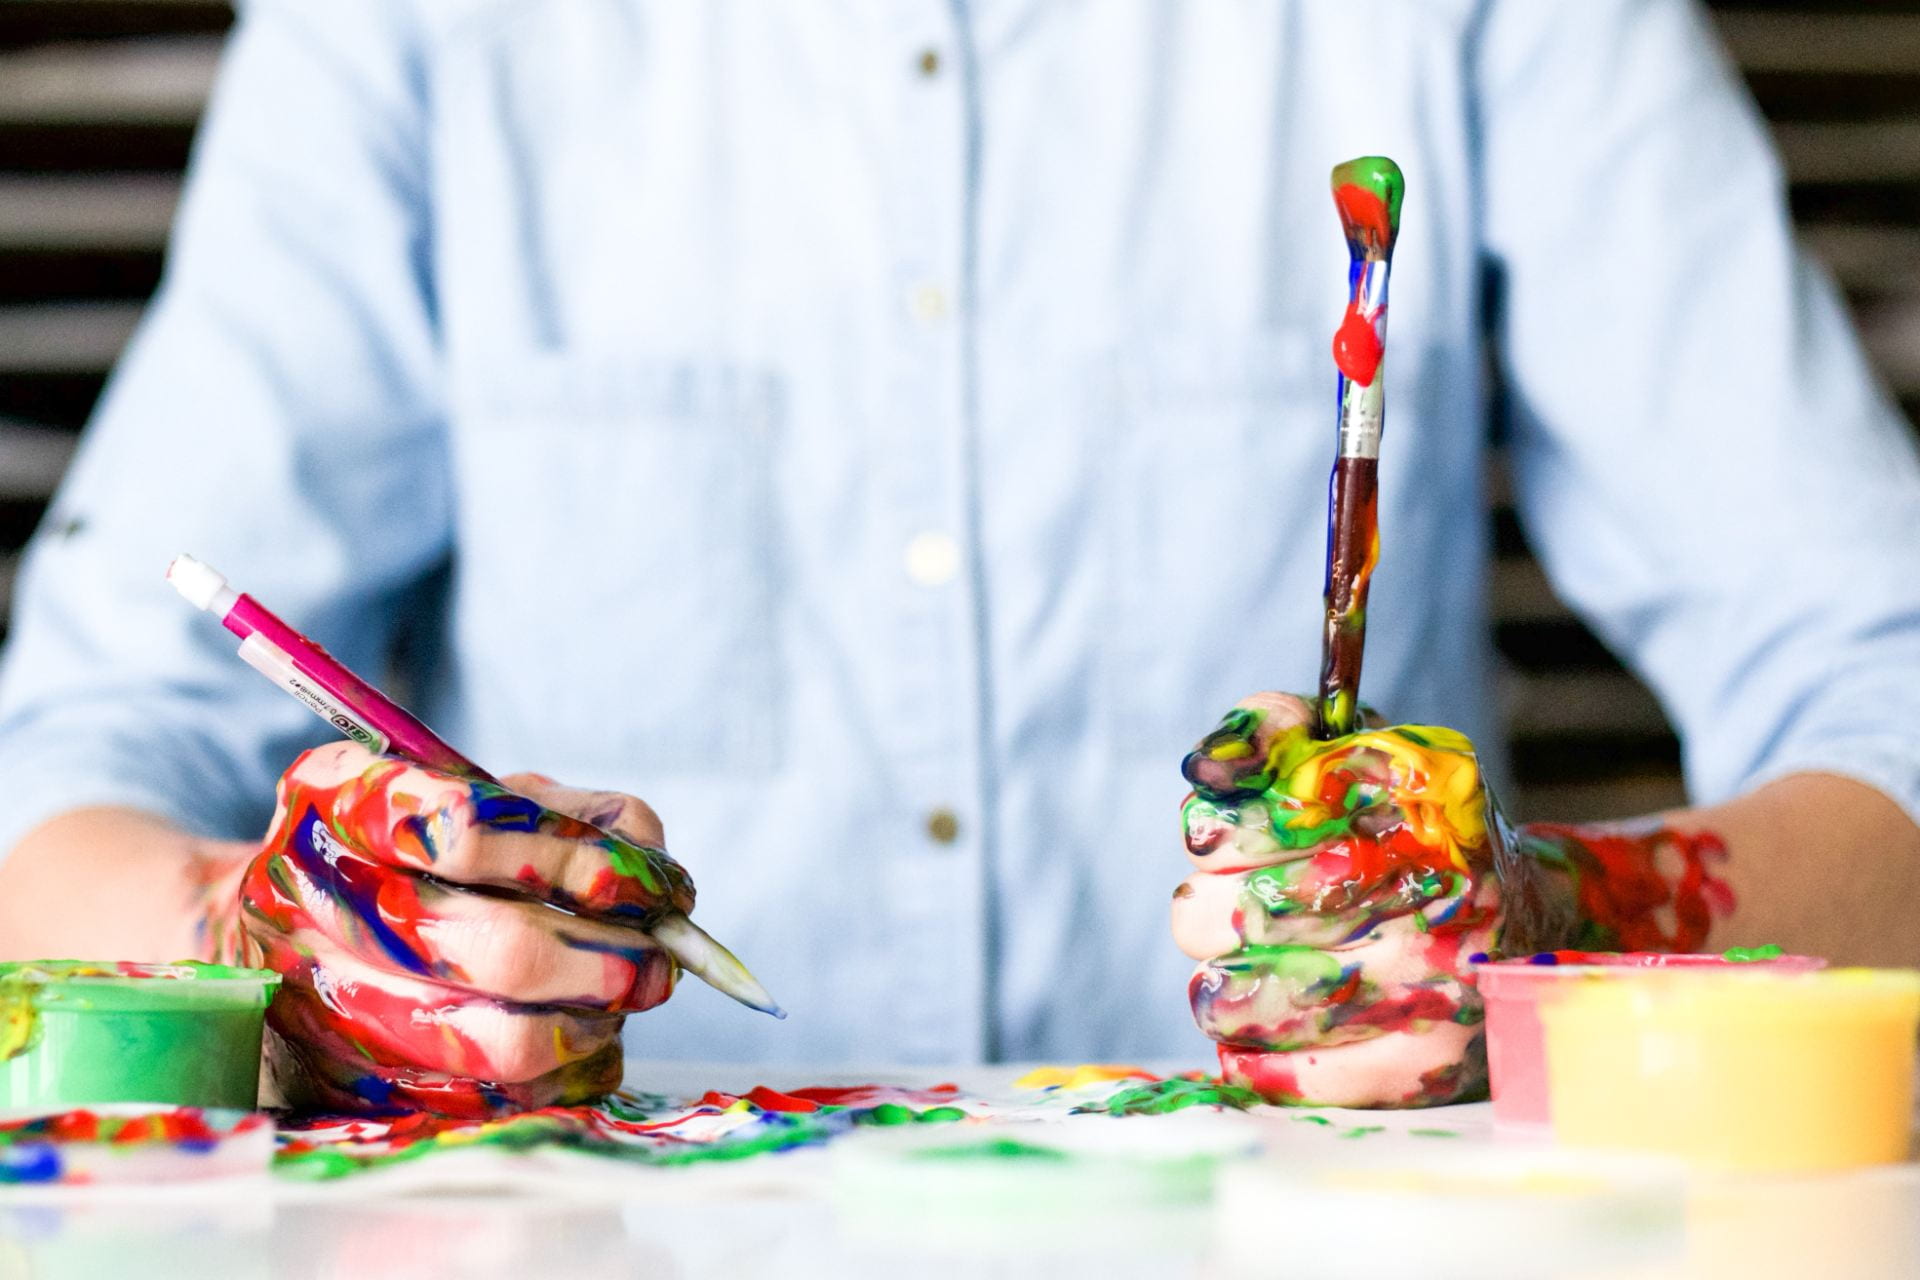 Someone holding an upside down paintbrush and a ben, covered in colourful paint